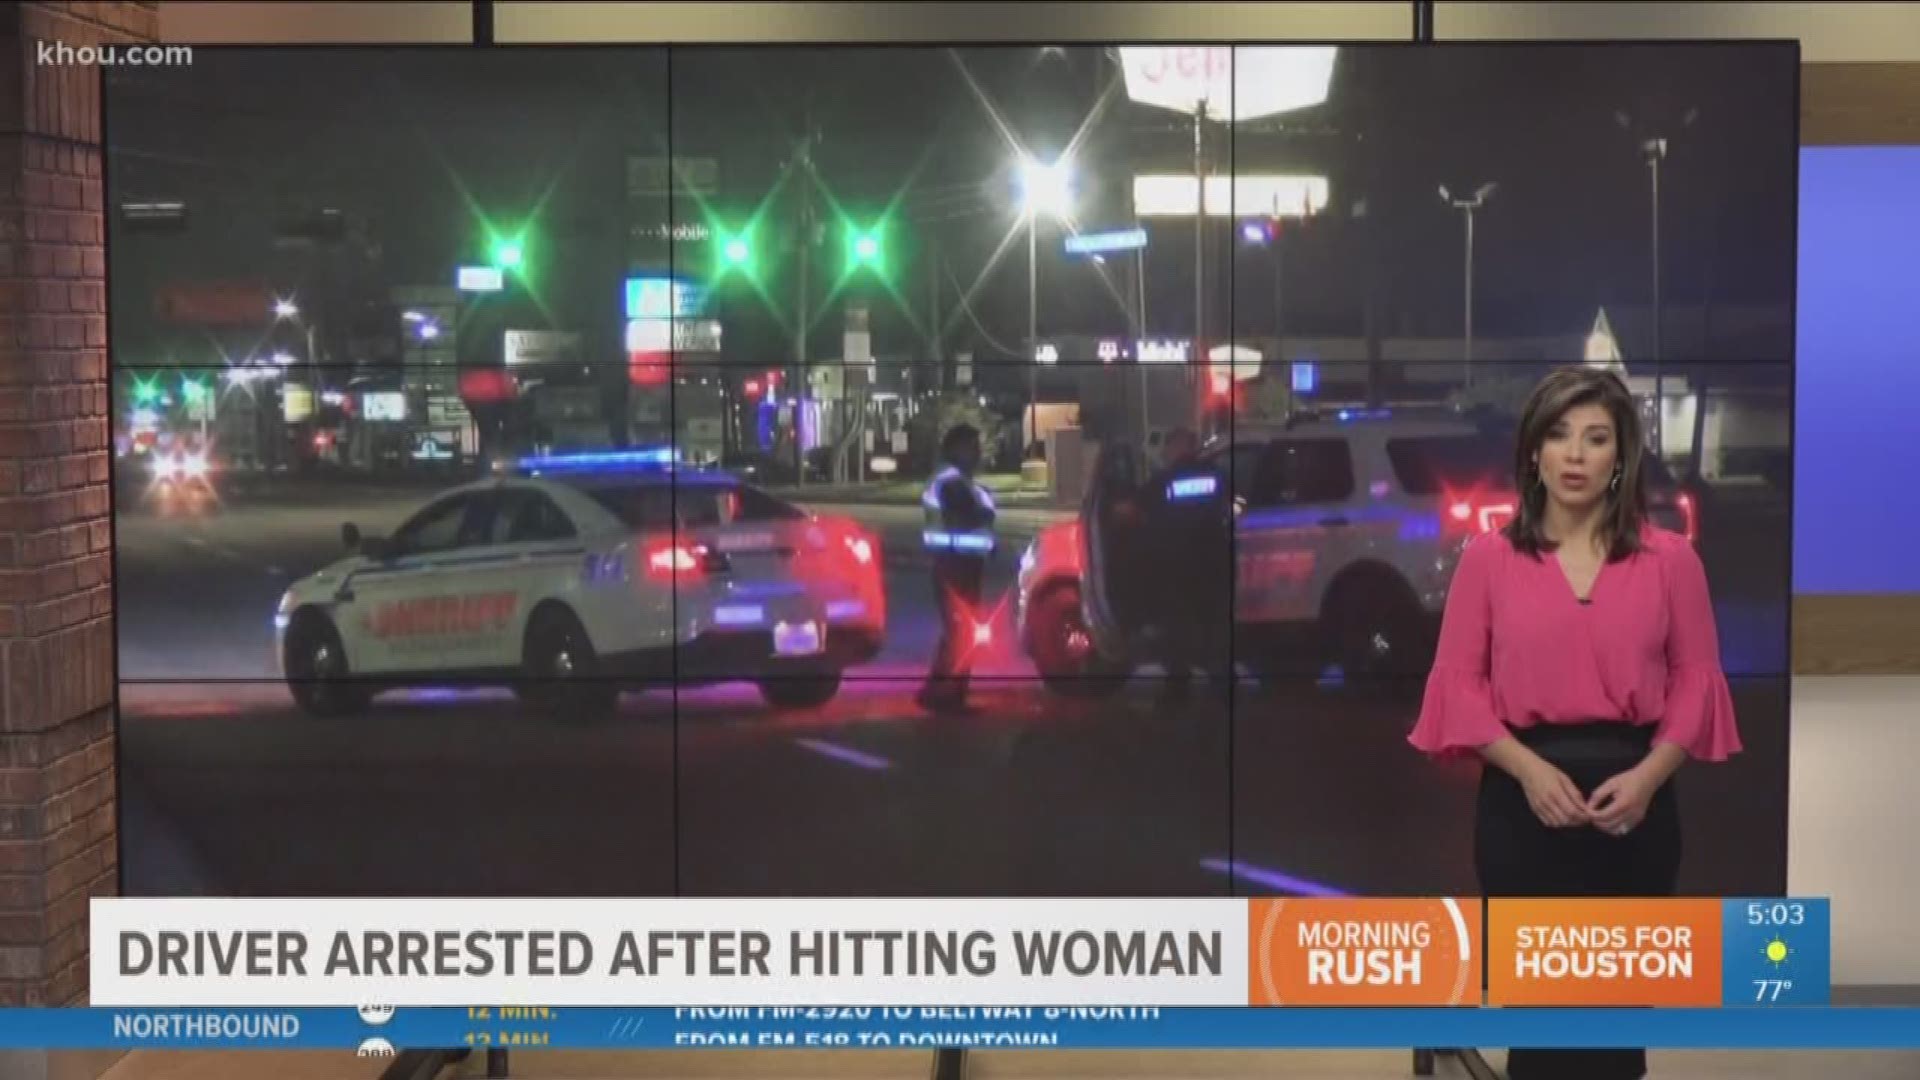 A woman was arrested after deputies say she fled the scene of a hit-and-run that left a female pedestrian injured in north Harris County overnight.